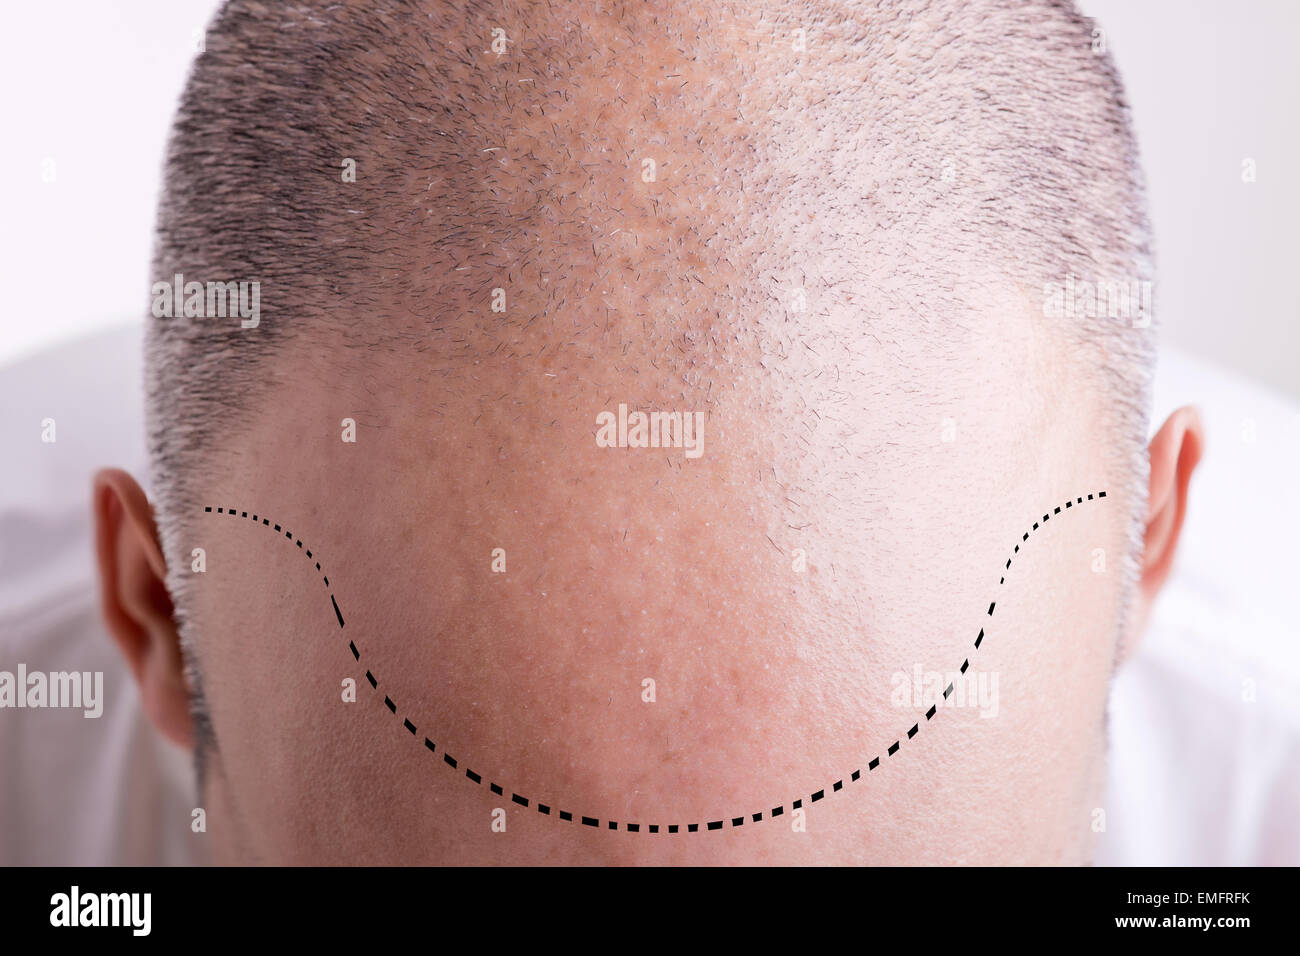 Top view of a men's head with a receding hair line Stock Photo